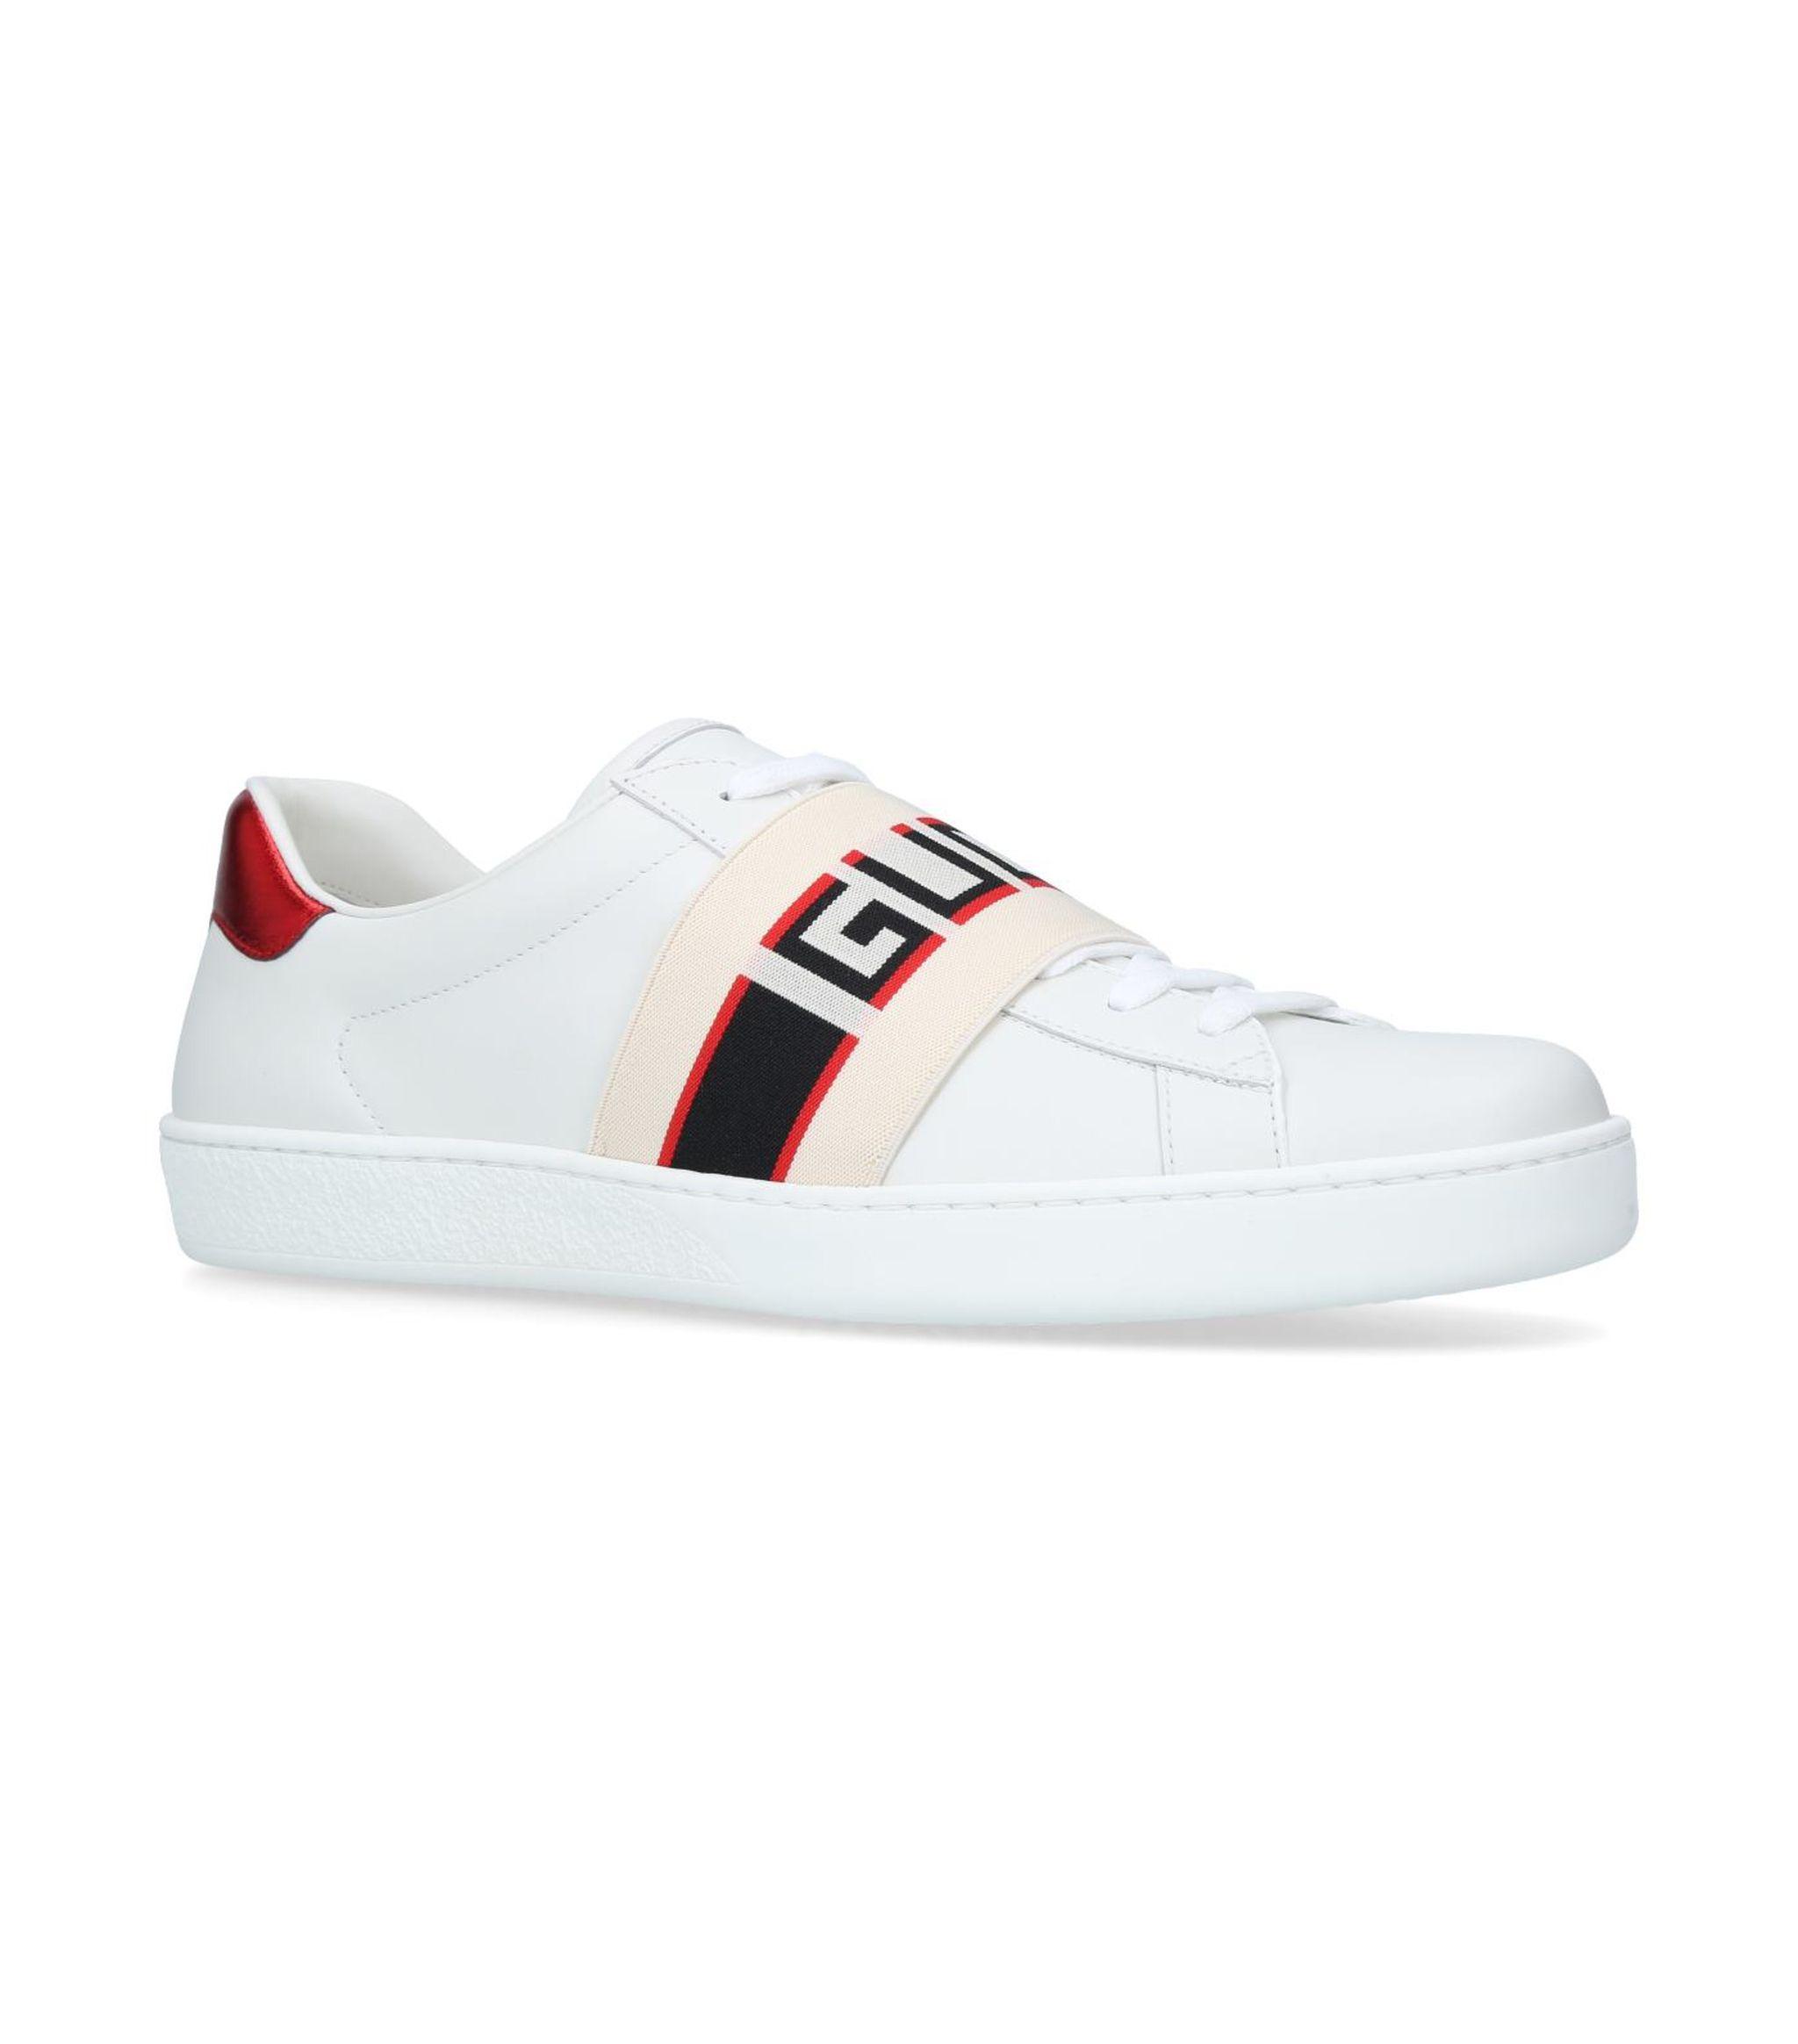 Gucci Leather Elastic Ace Sneakers in White for Men - Save 15% - Lyst